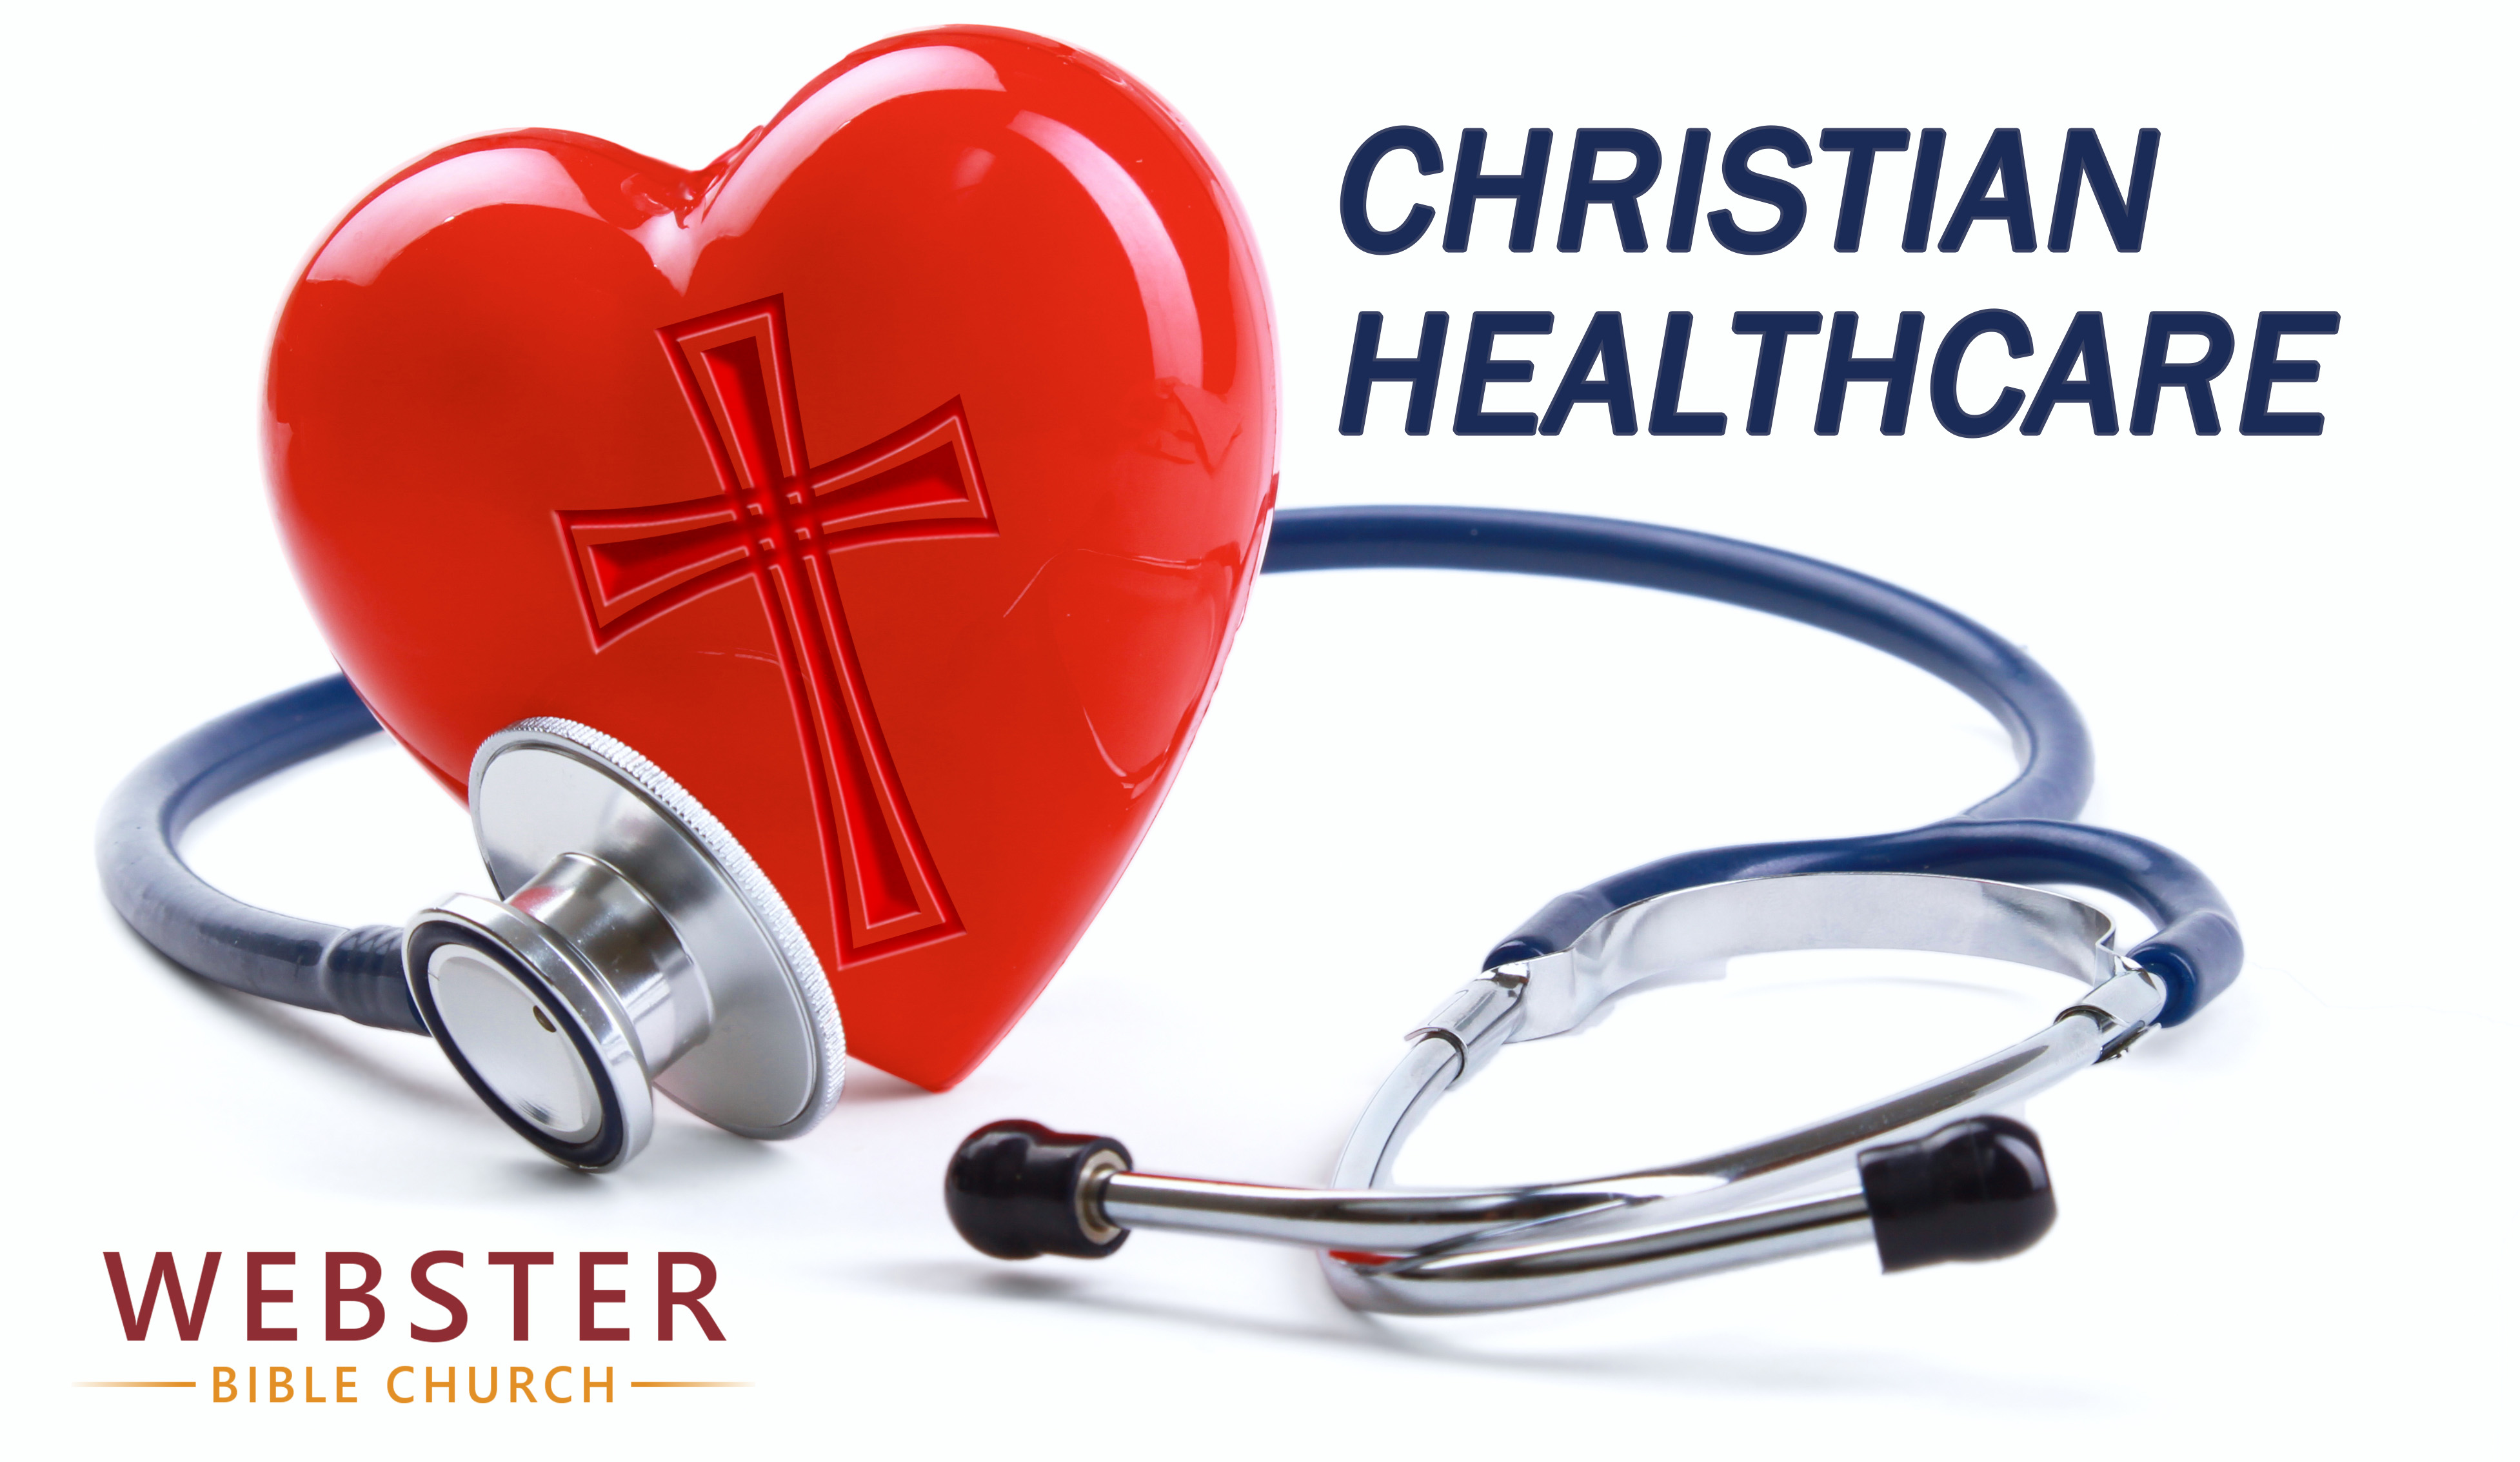 Christian Healthcare - Diagnostic Question #6: Do You Yearn for Heaven and to Be With Jesus?